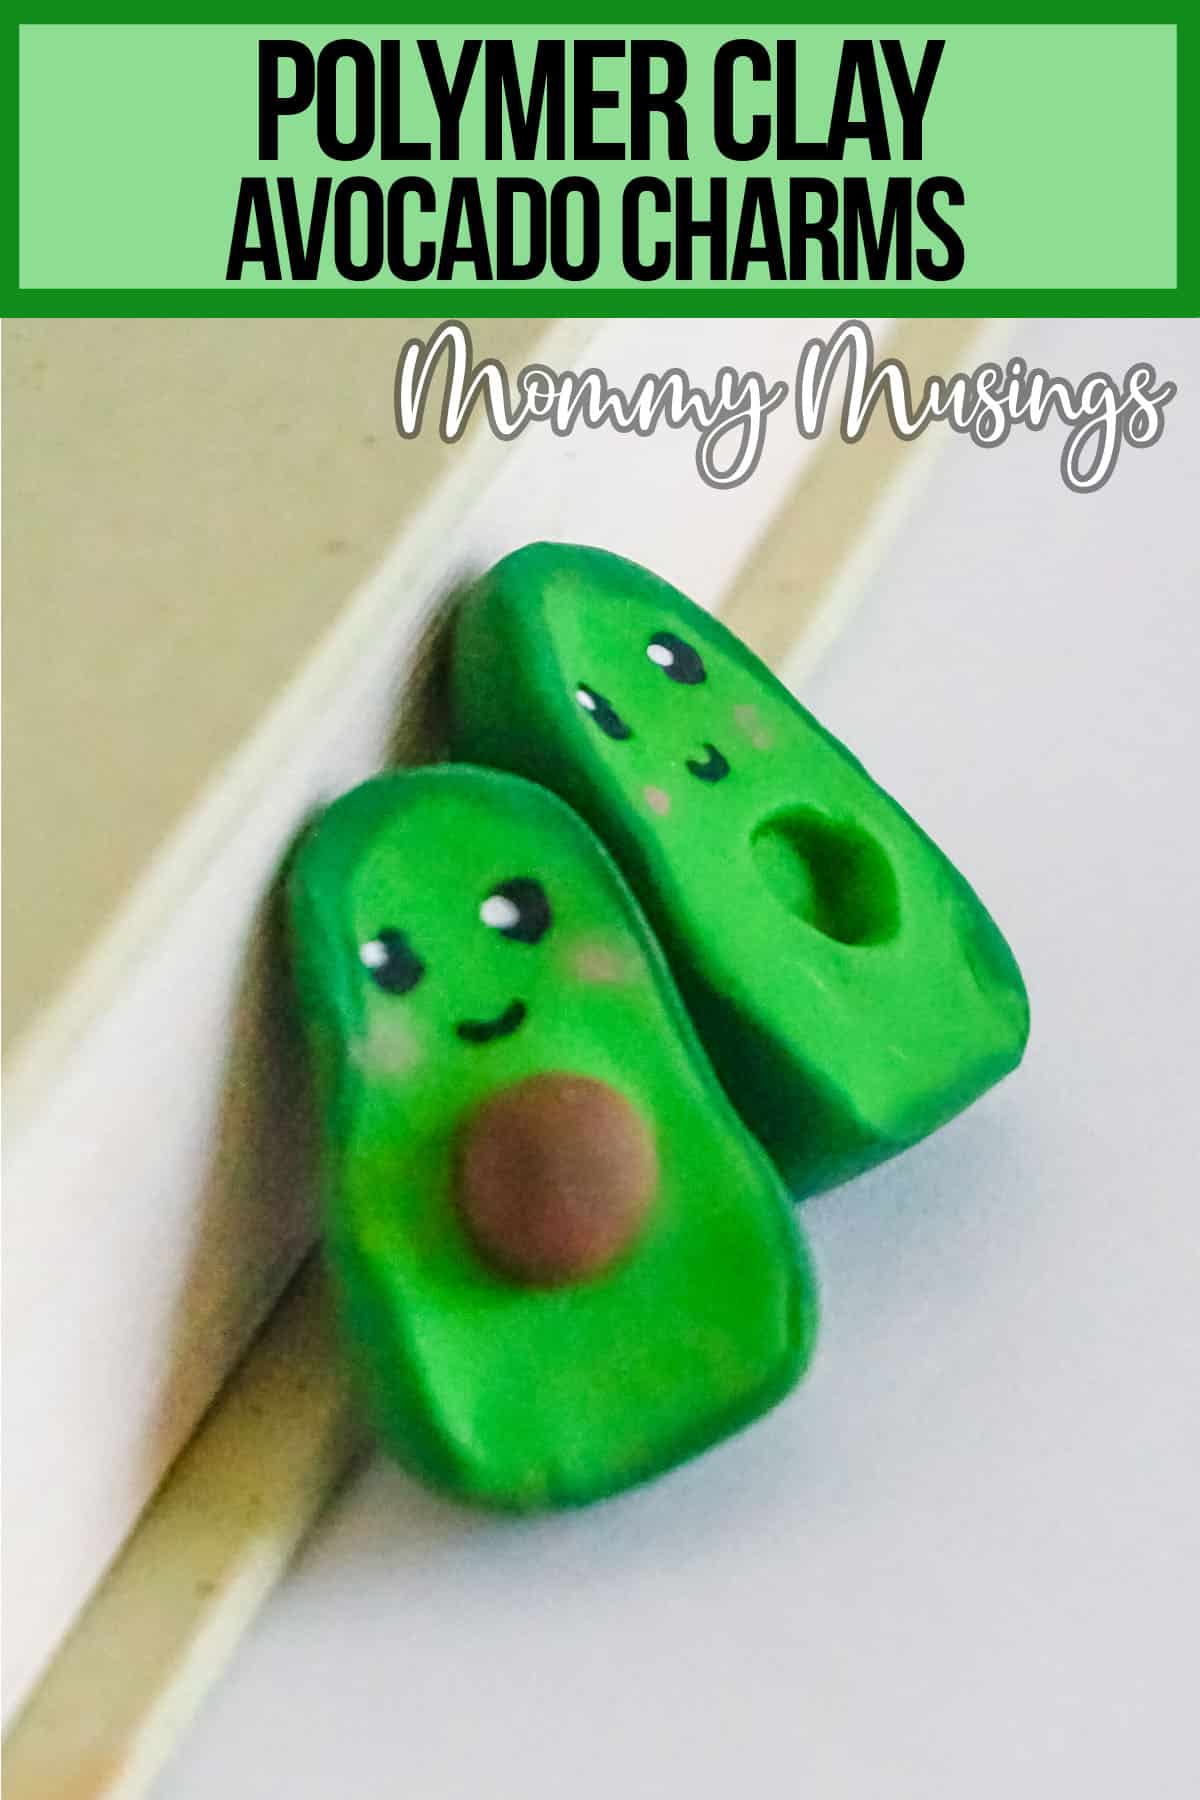 kawaii avocado charms for BFFs kids craft with text which reads Polymer Clay Avocado charms